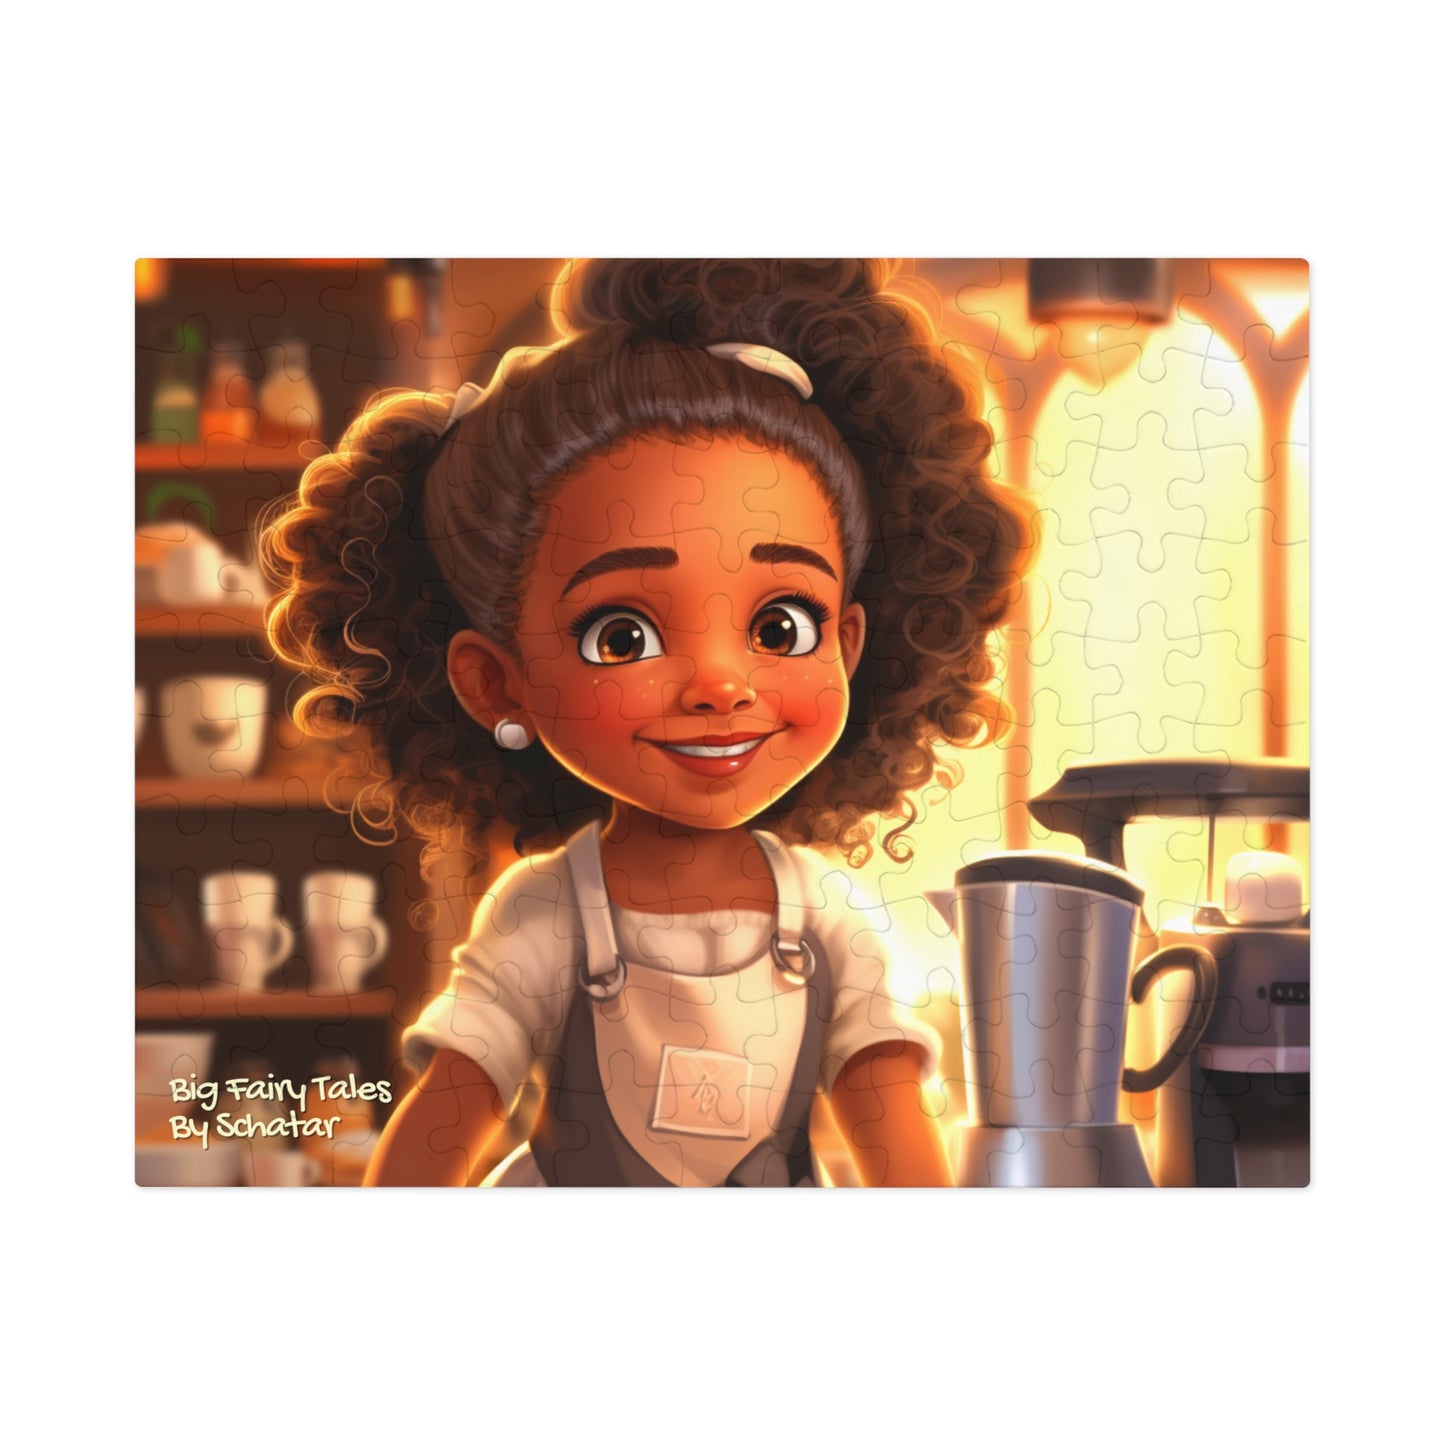 Coffee Shop Owner - Big Little Professionals Puzzle 15 From Big Fairy Tales By Schatar